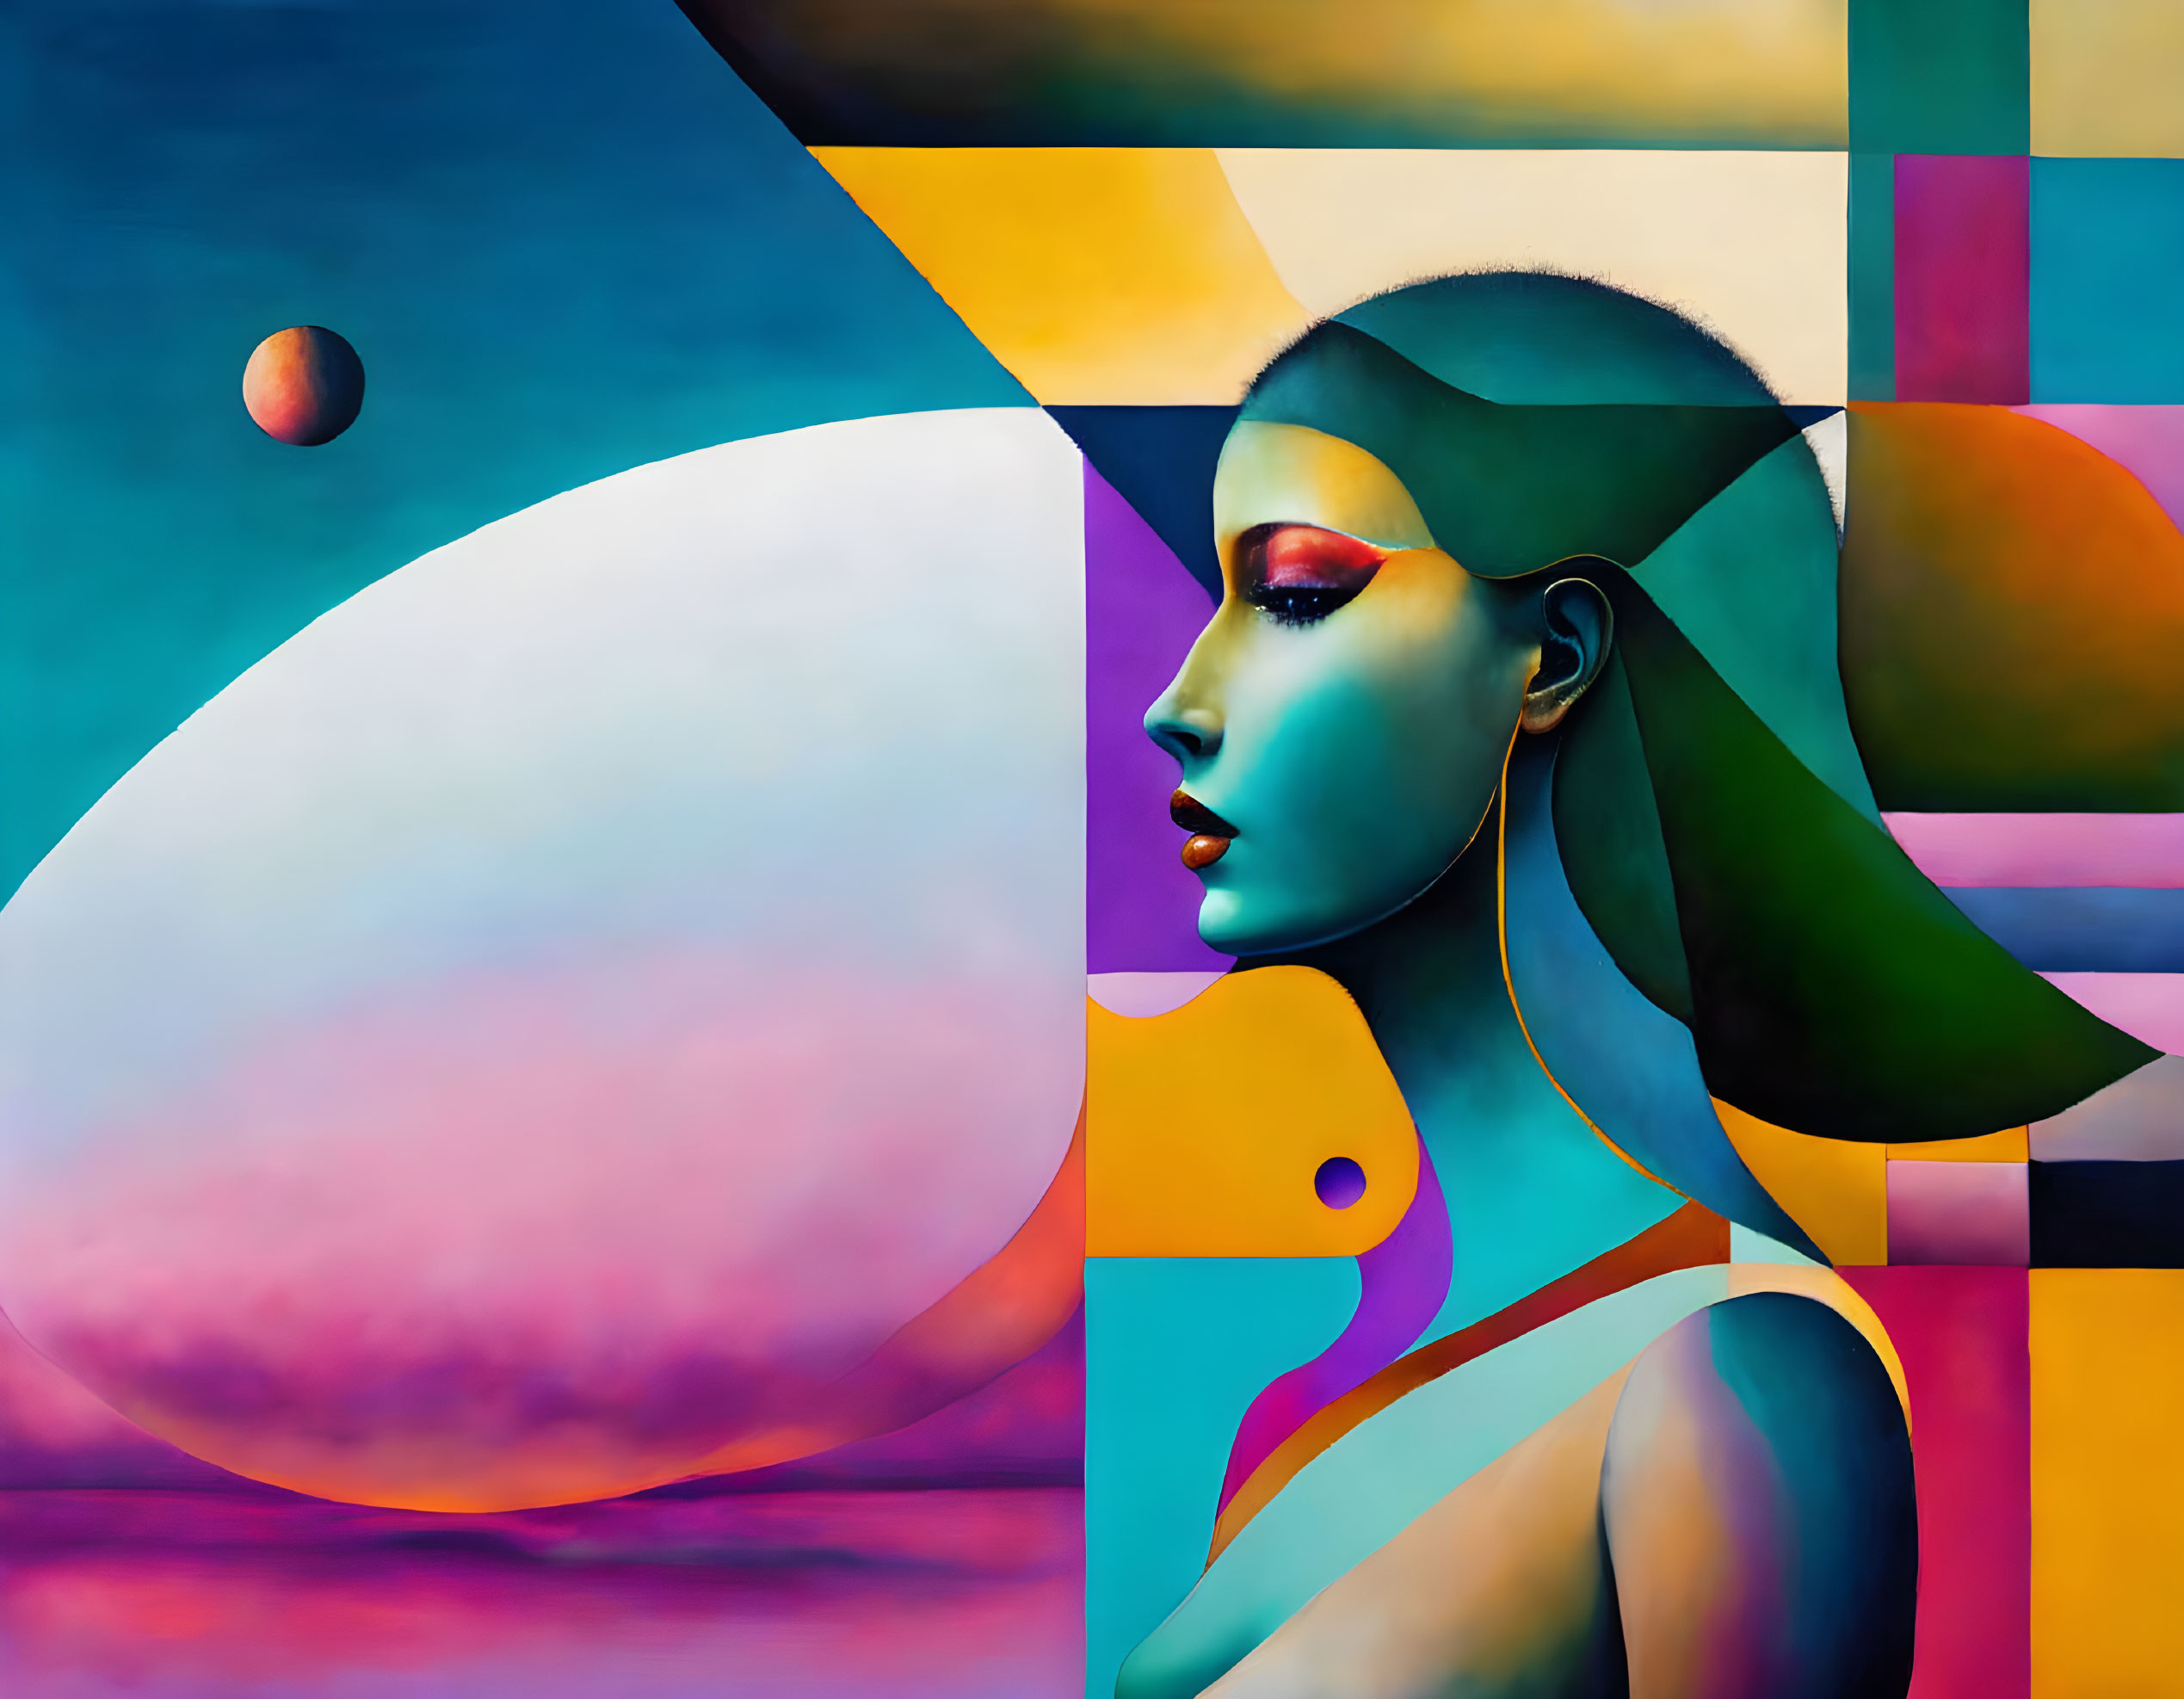 Colorful Abstract Painting: Geometric Woman Profile on Multicolored Background